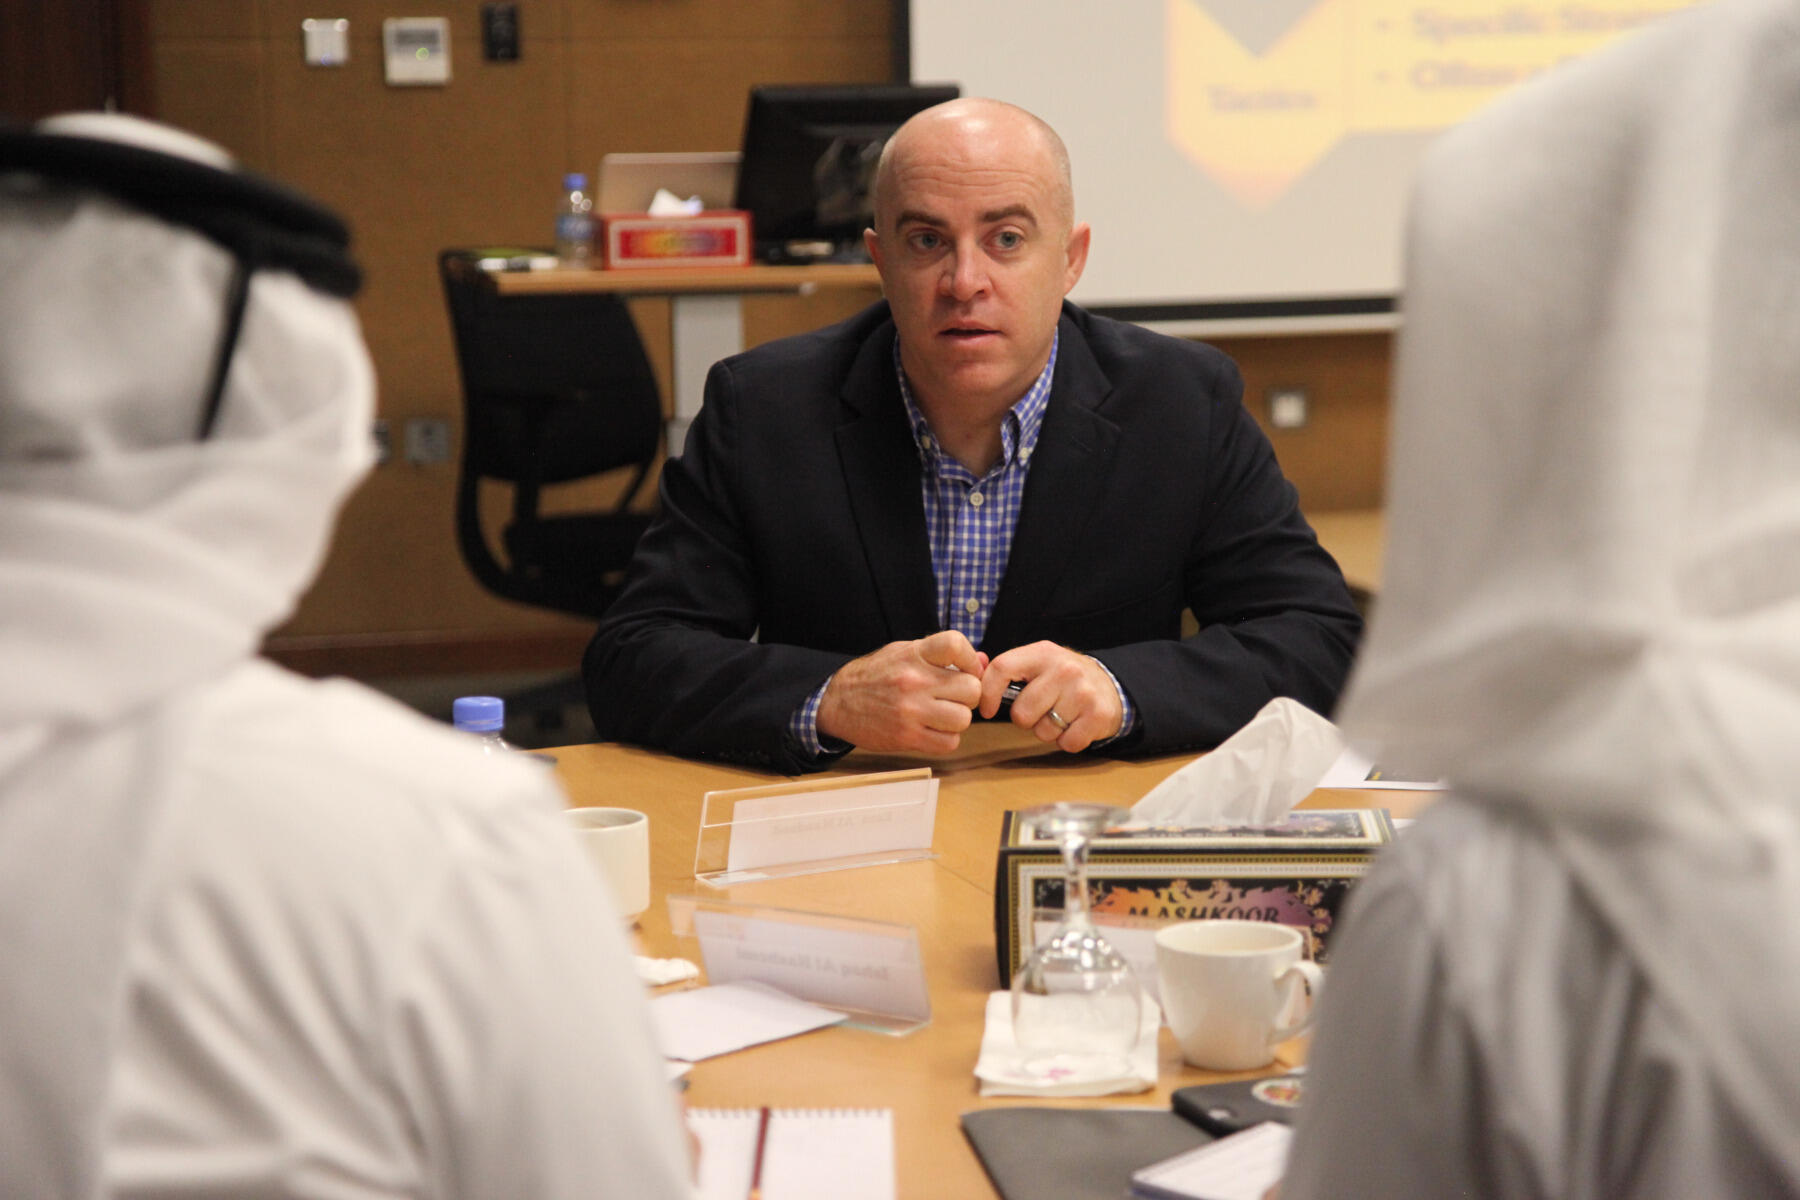 Brendan Dwyer, Ph.D., associate professor and director of research and distance learning for the Center for Sport Leadership, conducts a training session with members of the Qatar Olympic Committee.